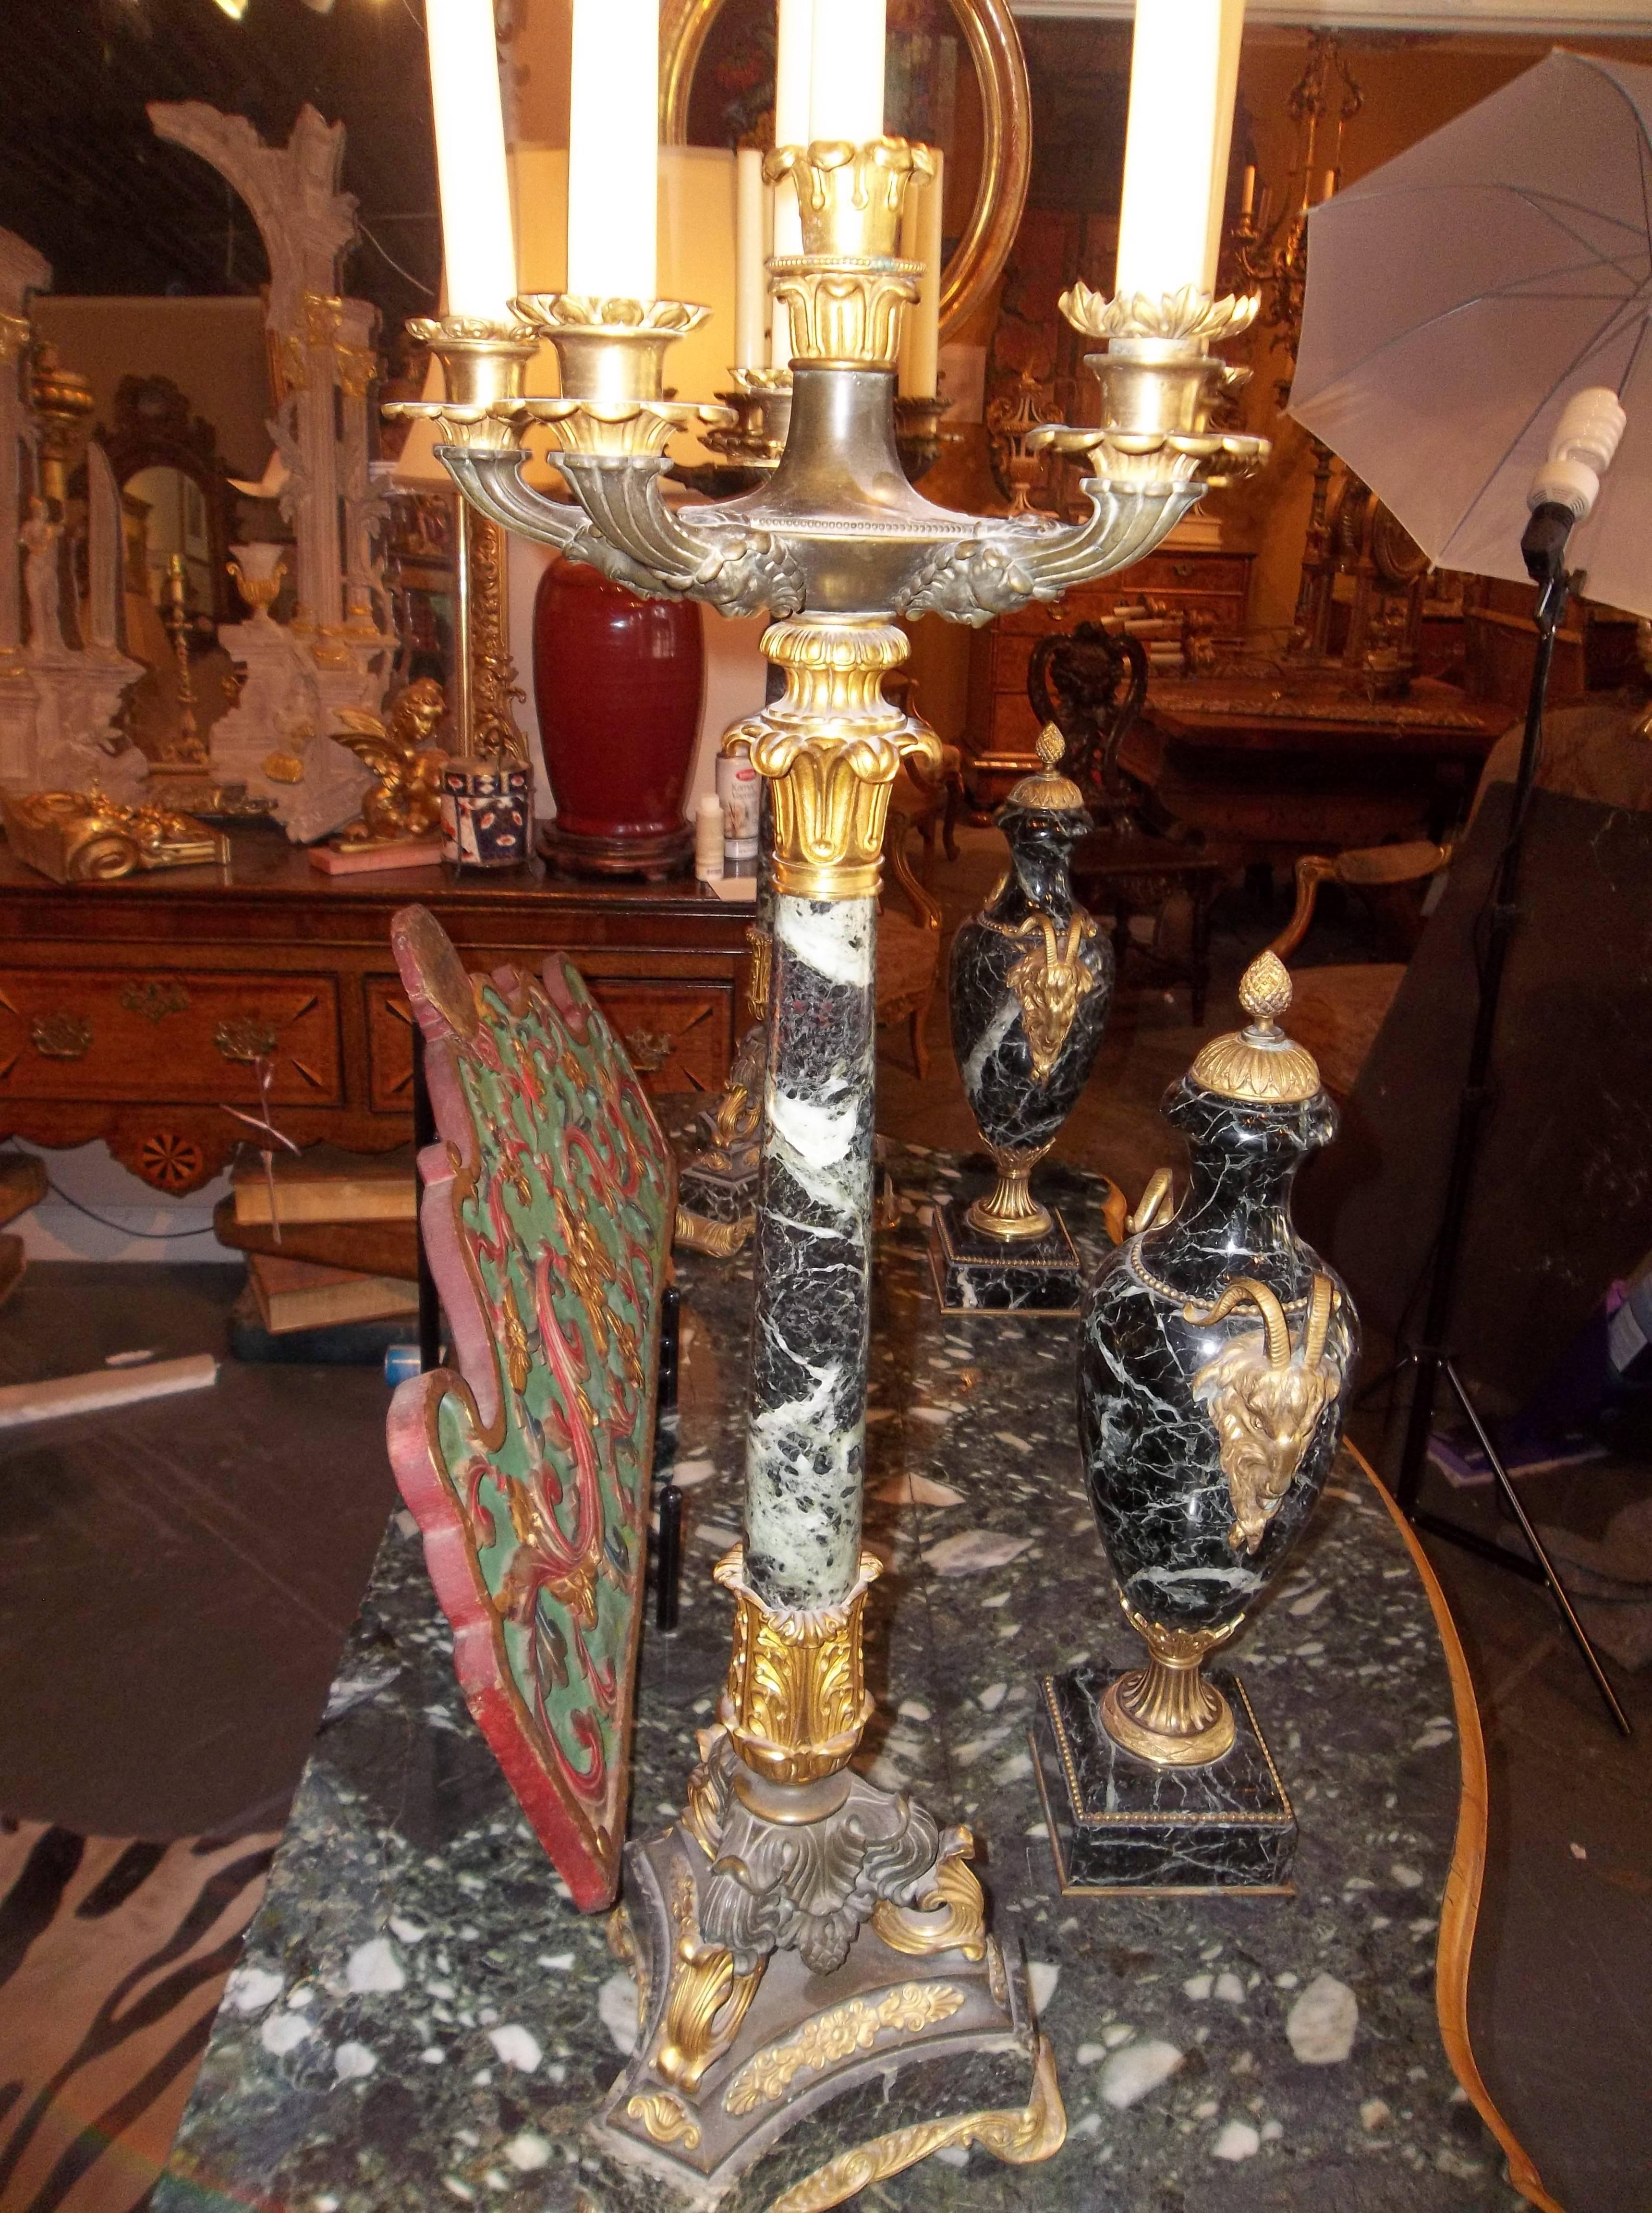 Late Empire or Charles X marble, bronze and gilt bronze candelabra. Impressive size and weight (35 lbs); the bronze and ormolu finely cast and chased. The five arms attached with masks underneath. Some bobeches and candle drip cups have been